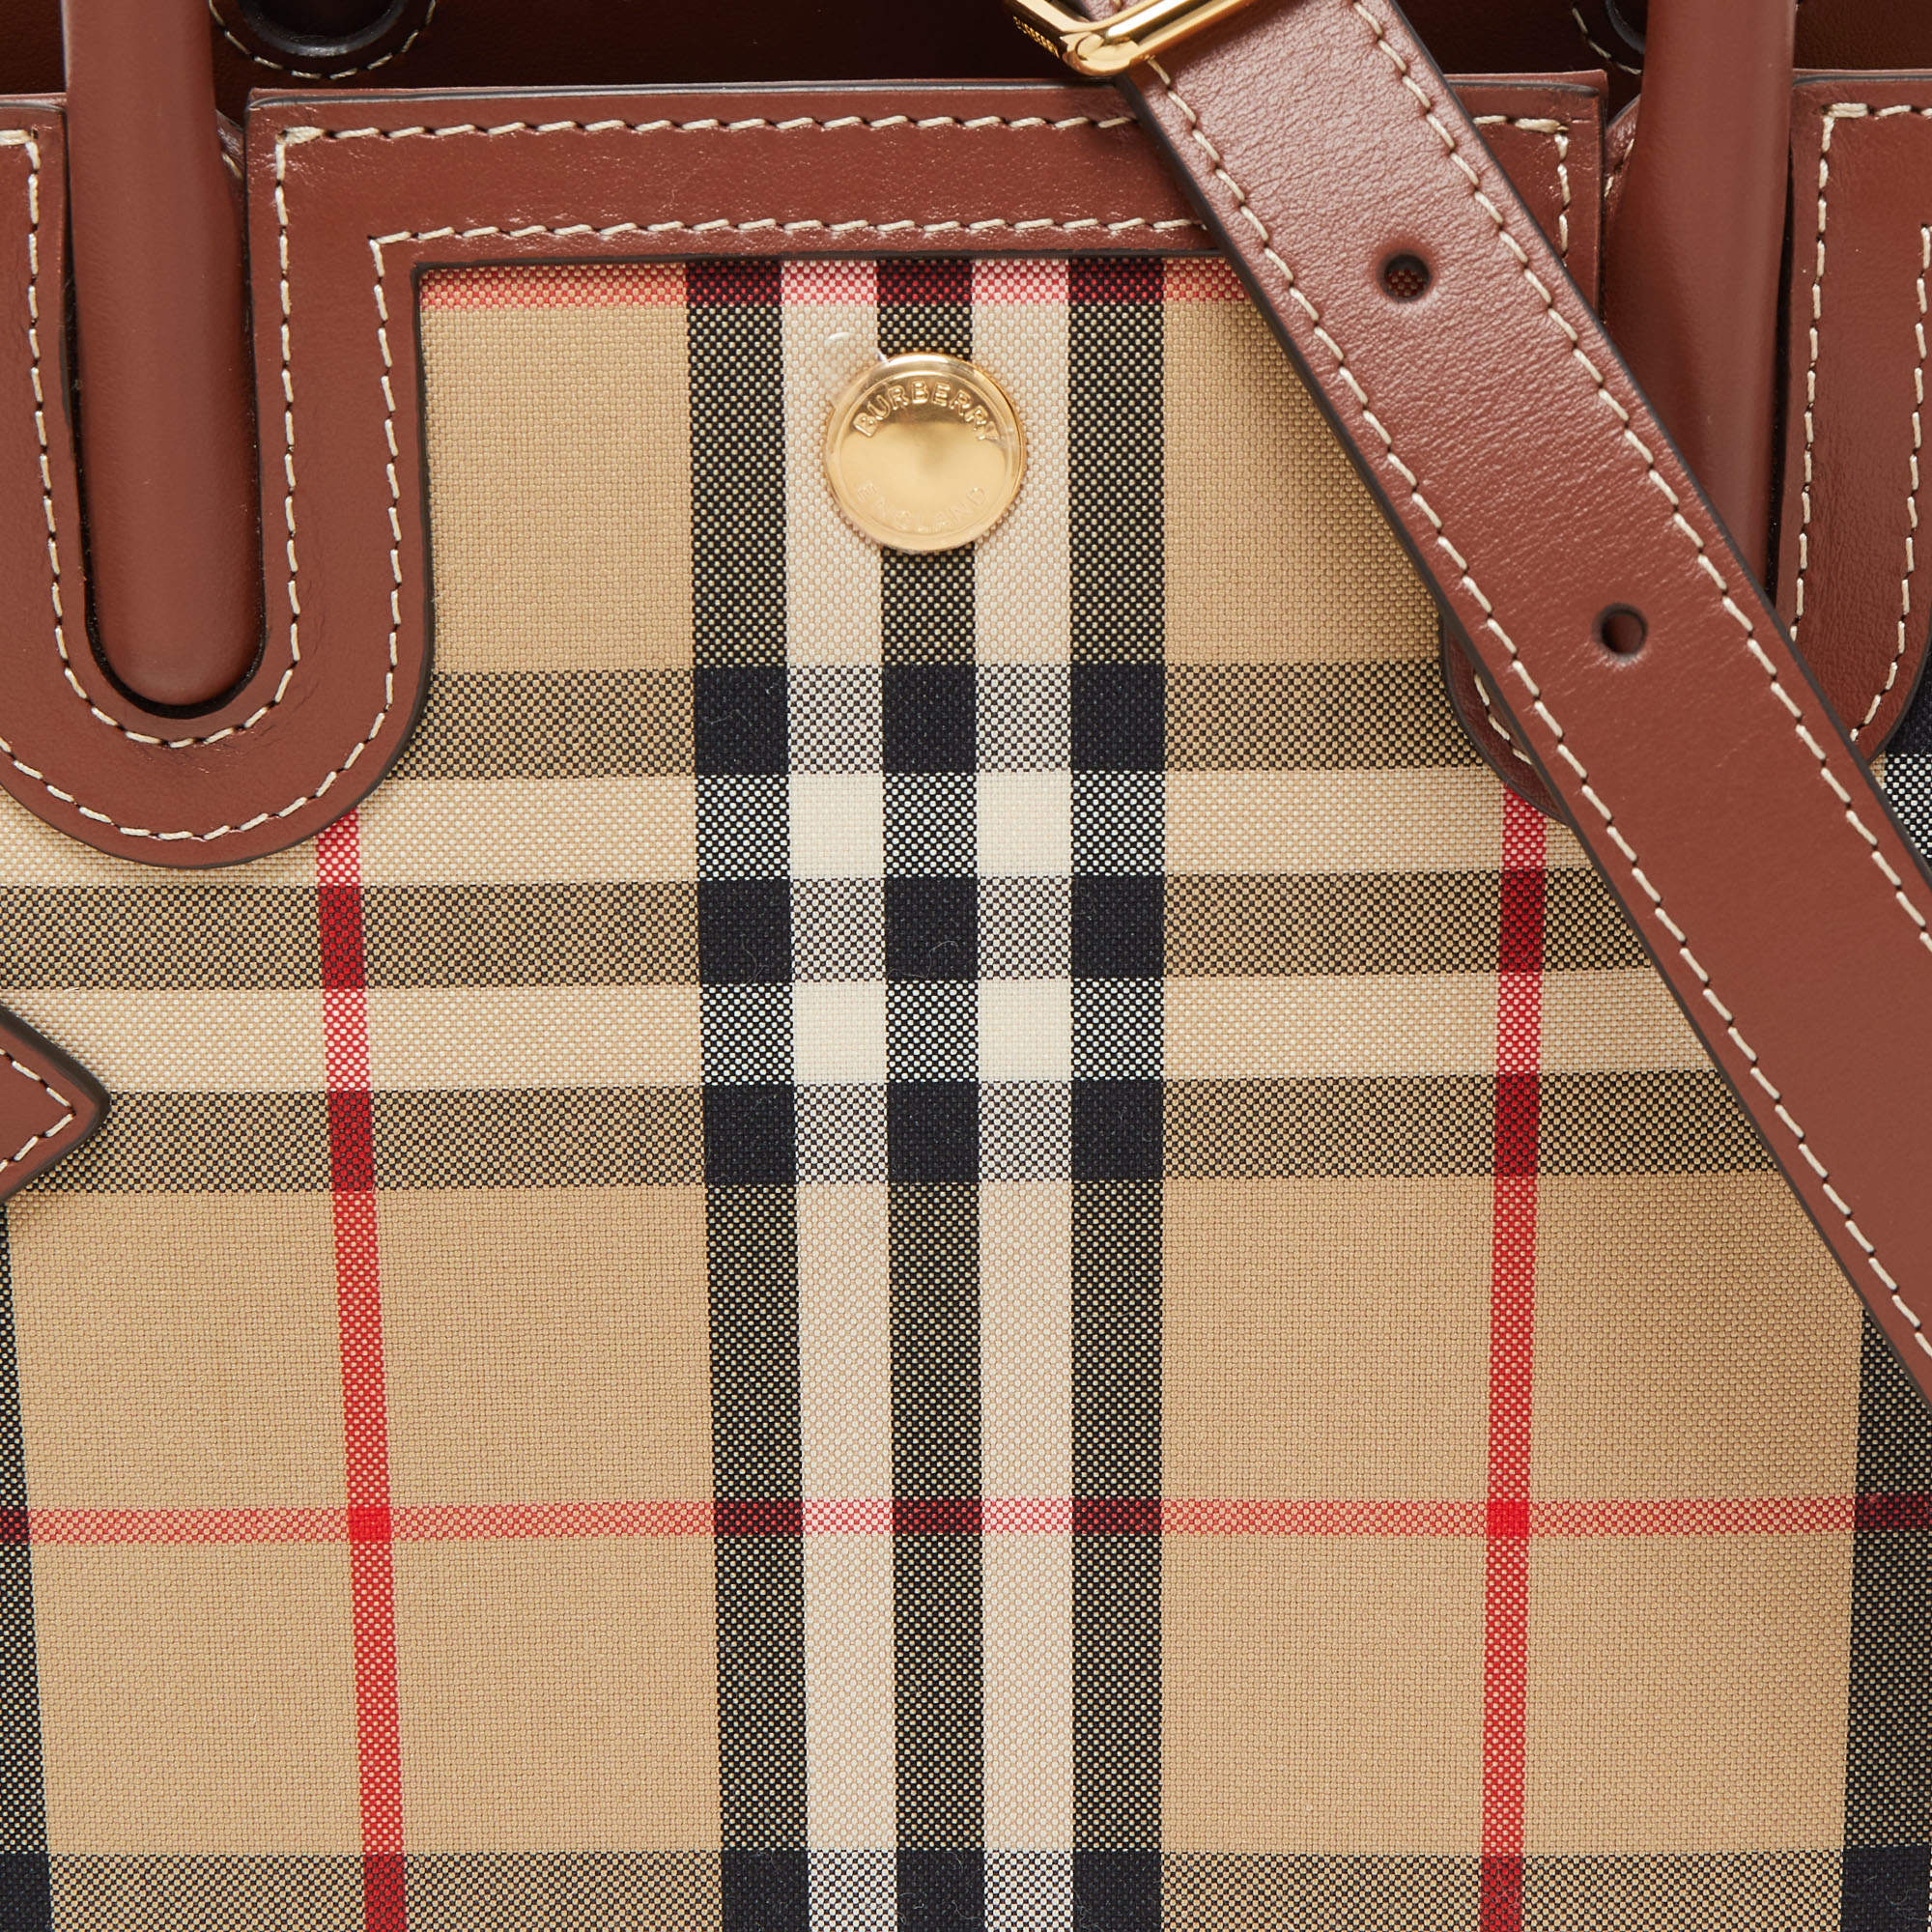 BURBERRY: TB bag in canvas and leather - Beige  Burberry mini bag 8070576  online at